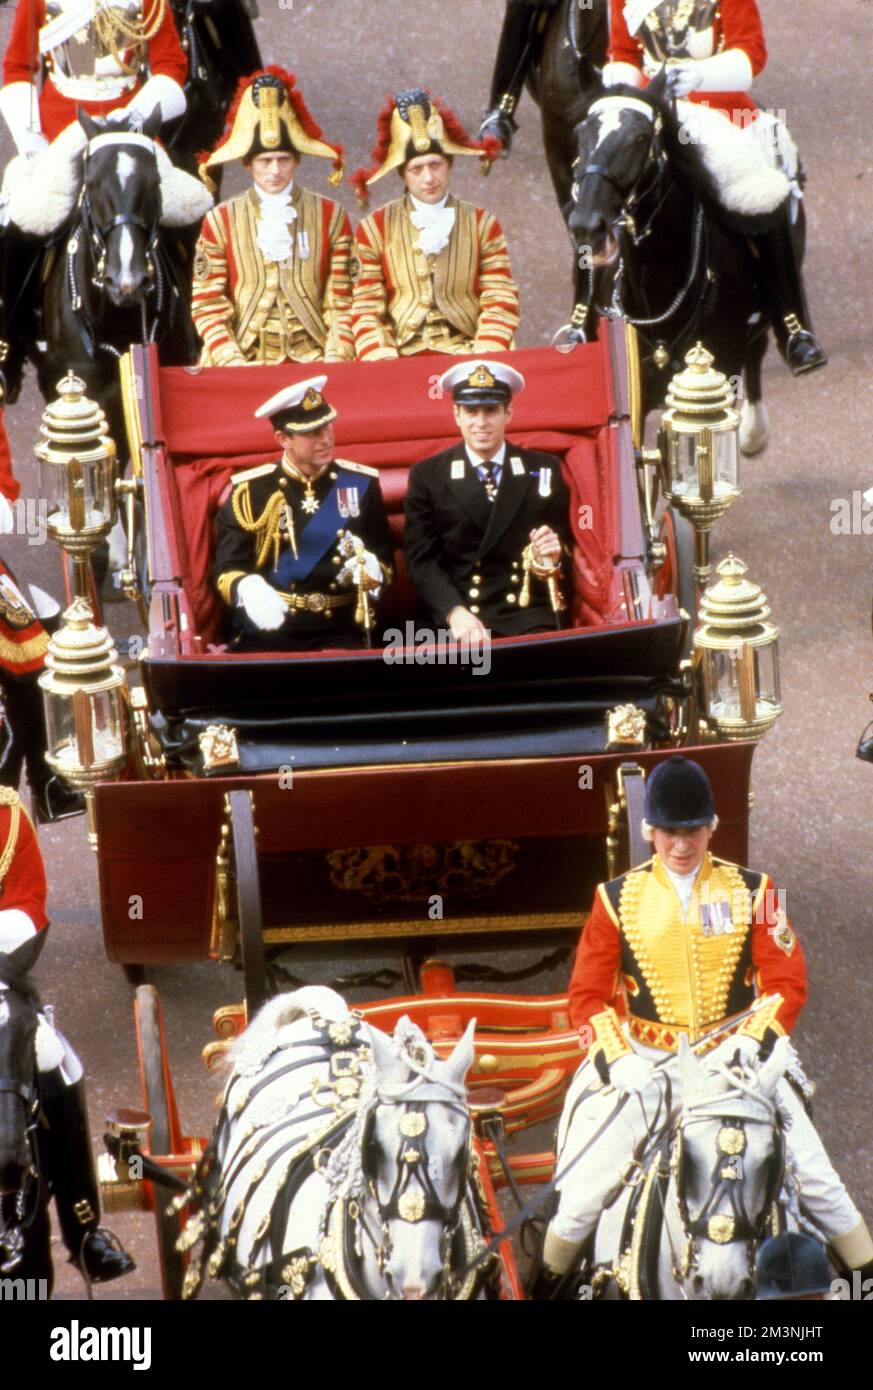 Prince Charles and his brother, Prince Andrew on their way to St. Paul's Cathedral in the City of London for Charles's marriage to Lady Diana Spencer on 29th July 1981.      Date: 1981 Stock Photo